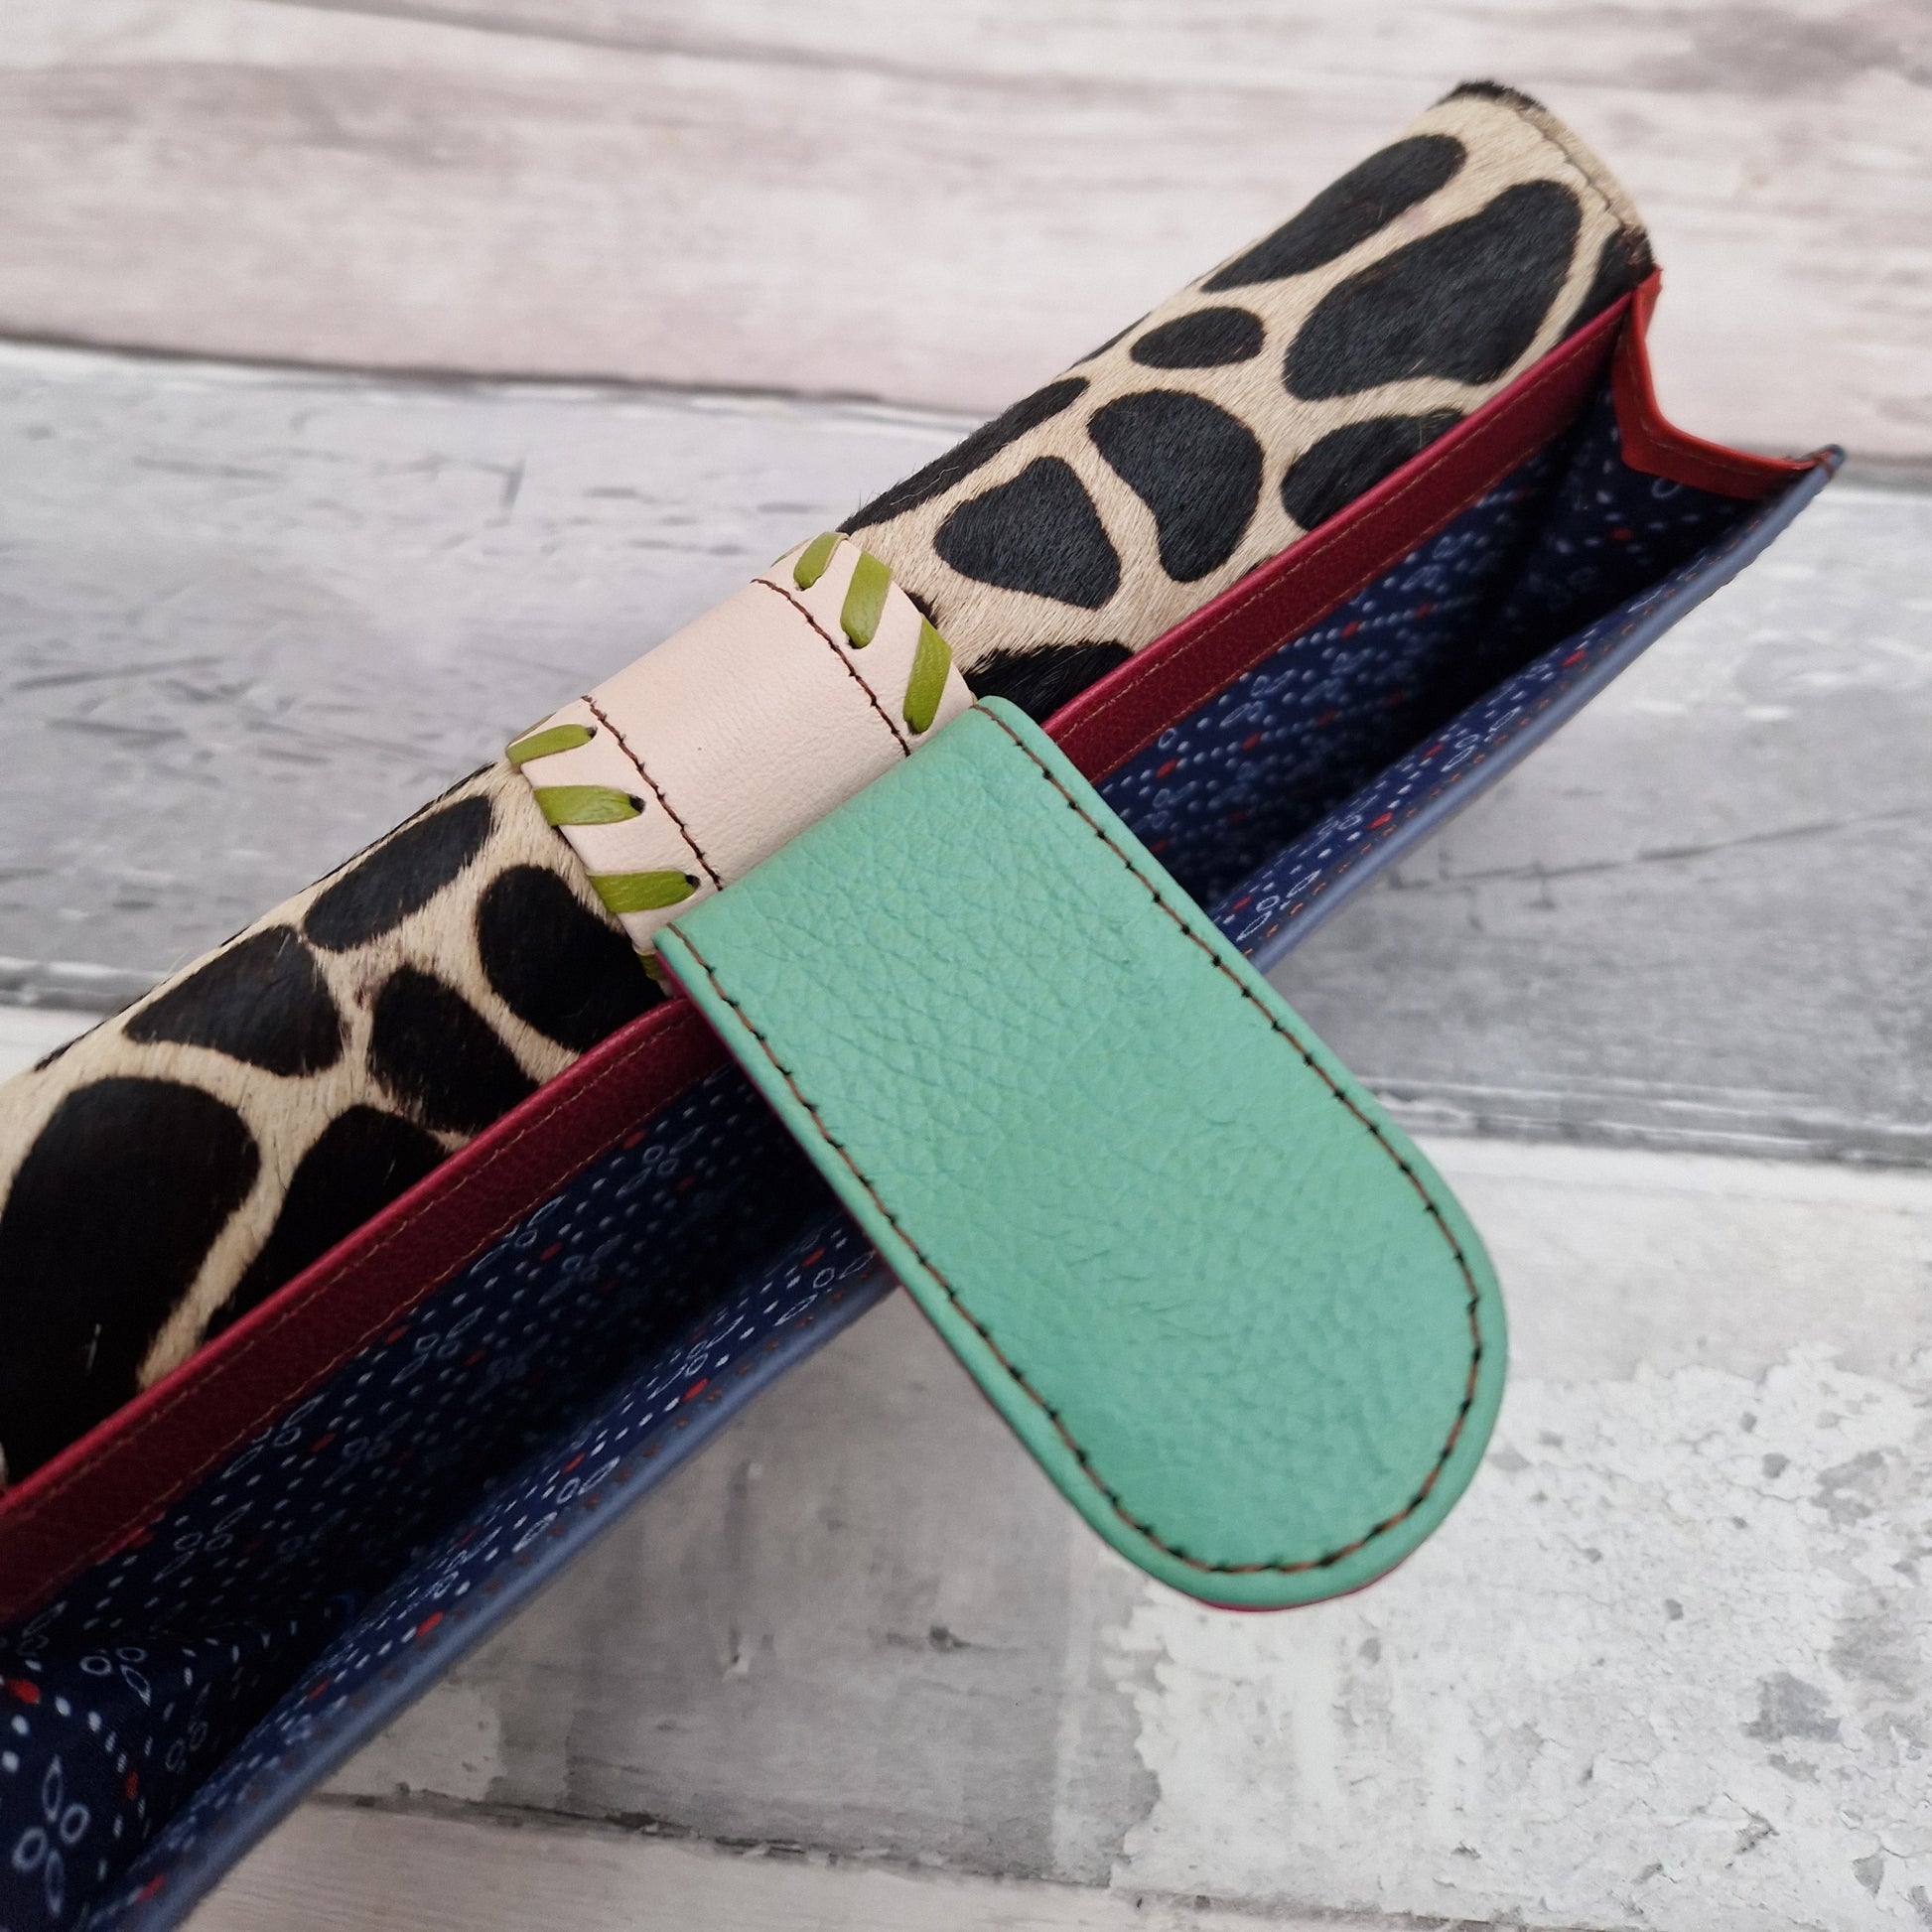 Giraffe print purse made entirely from leather off cuts in a rainbow of colours.